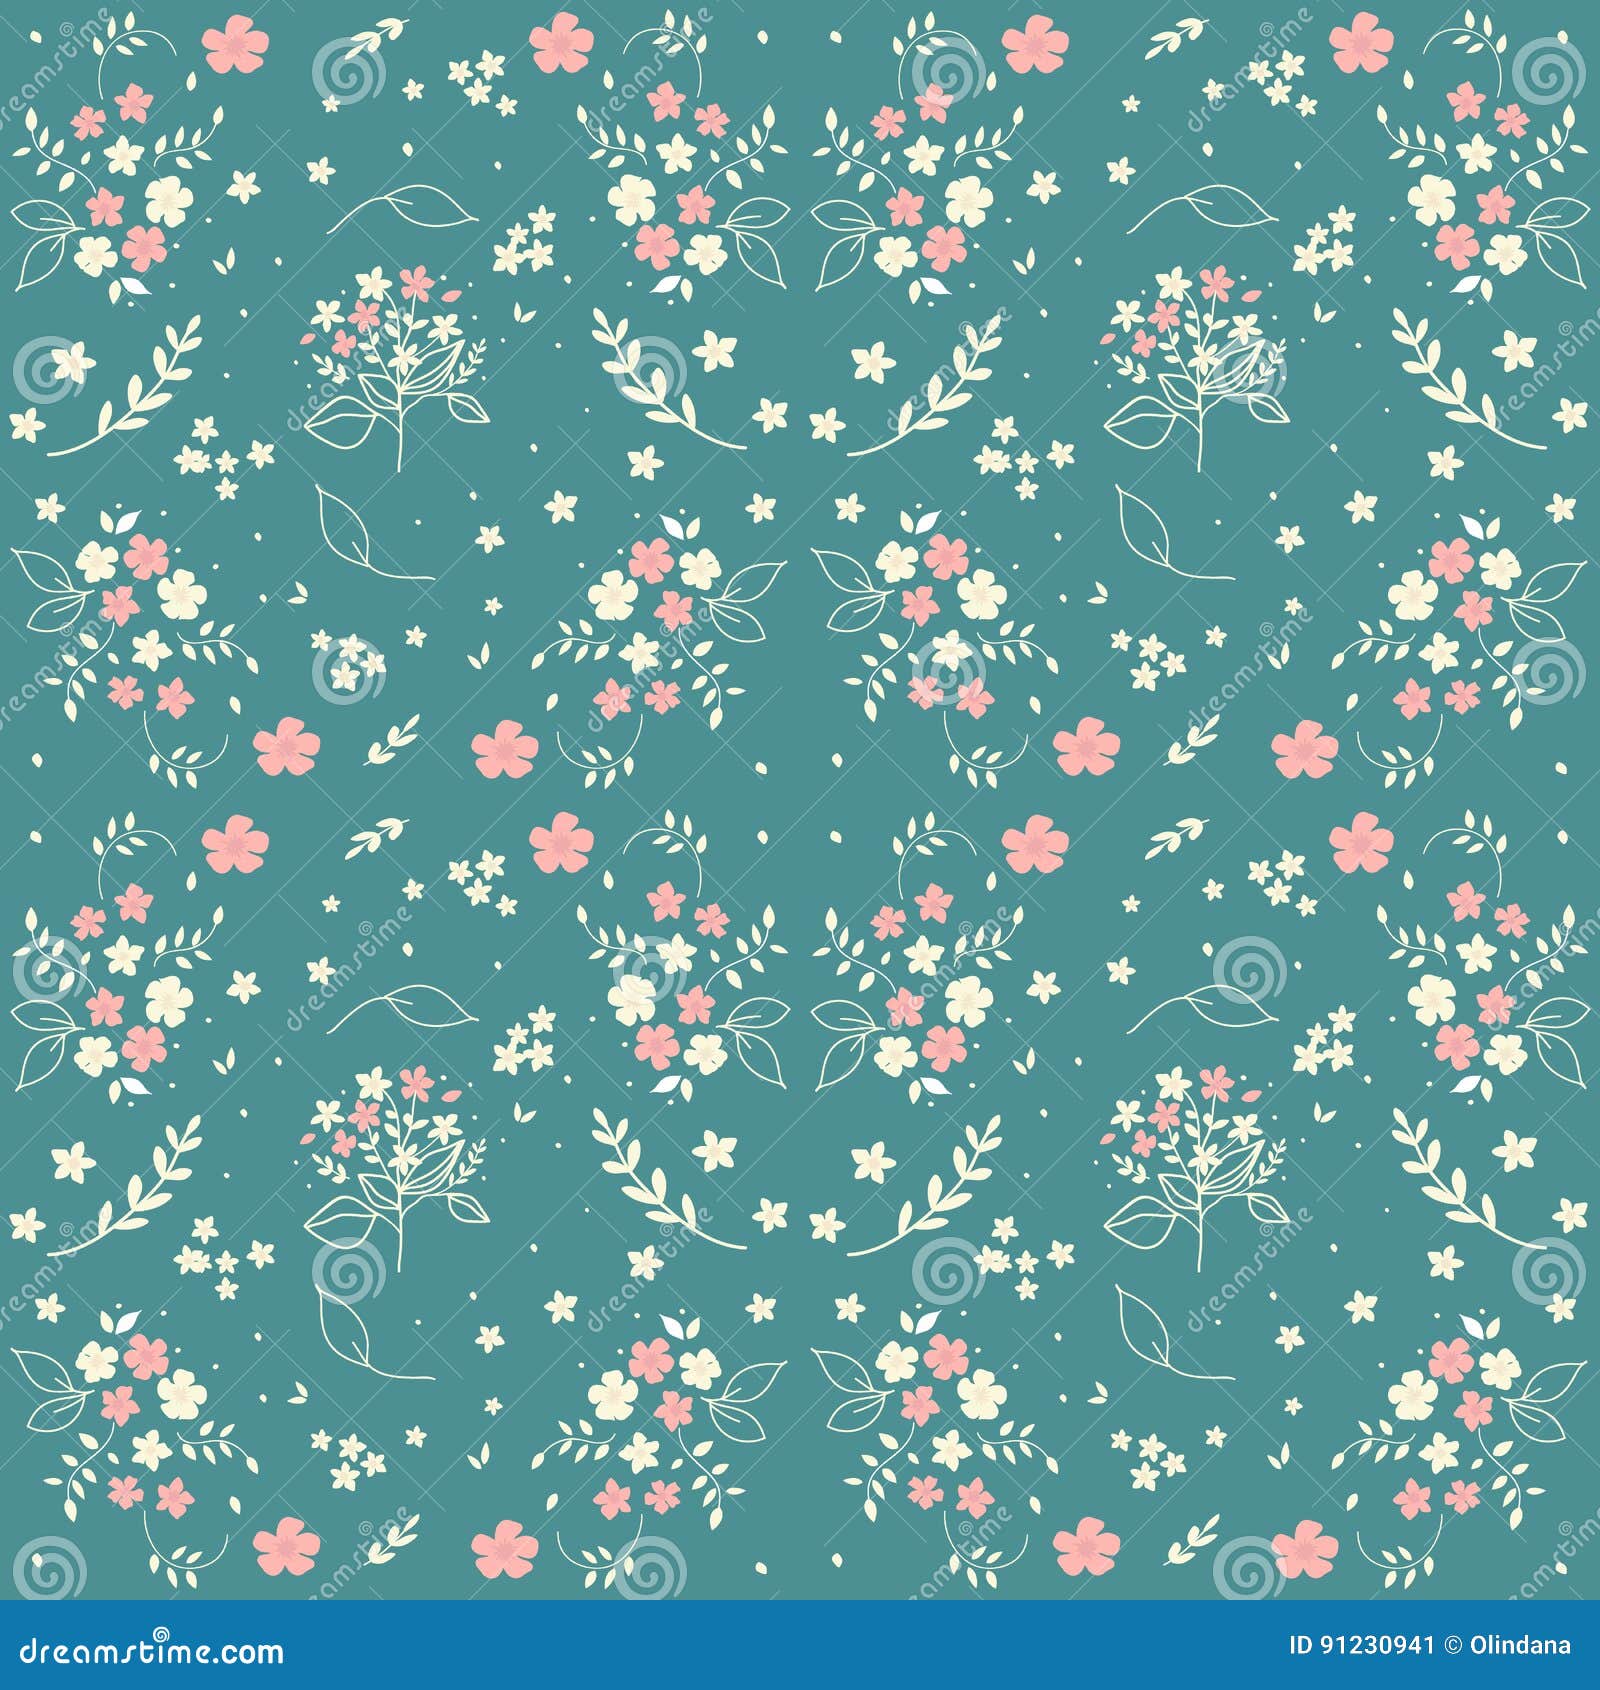 seamless floral pattern hand drawn small white silhouette flowers in bouquet twigs berries on blueish green background, fabric, sc